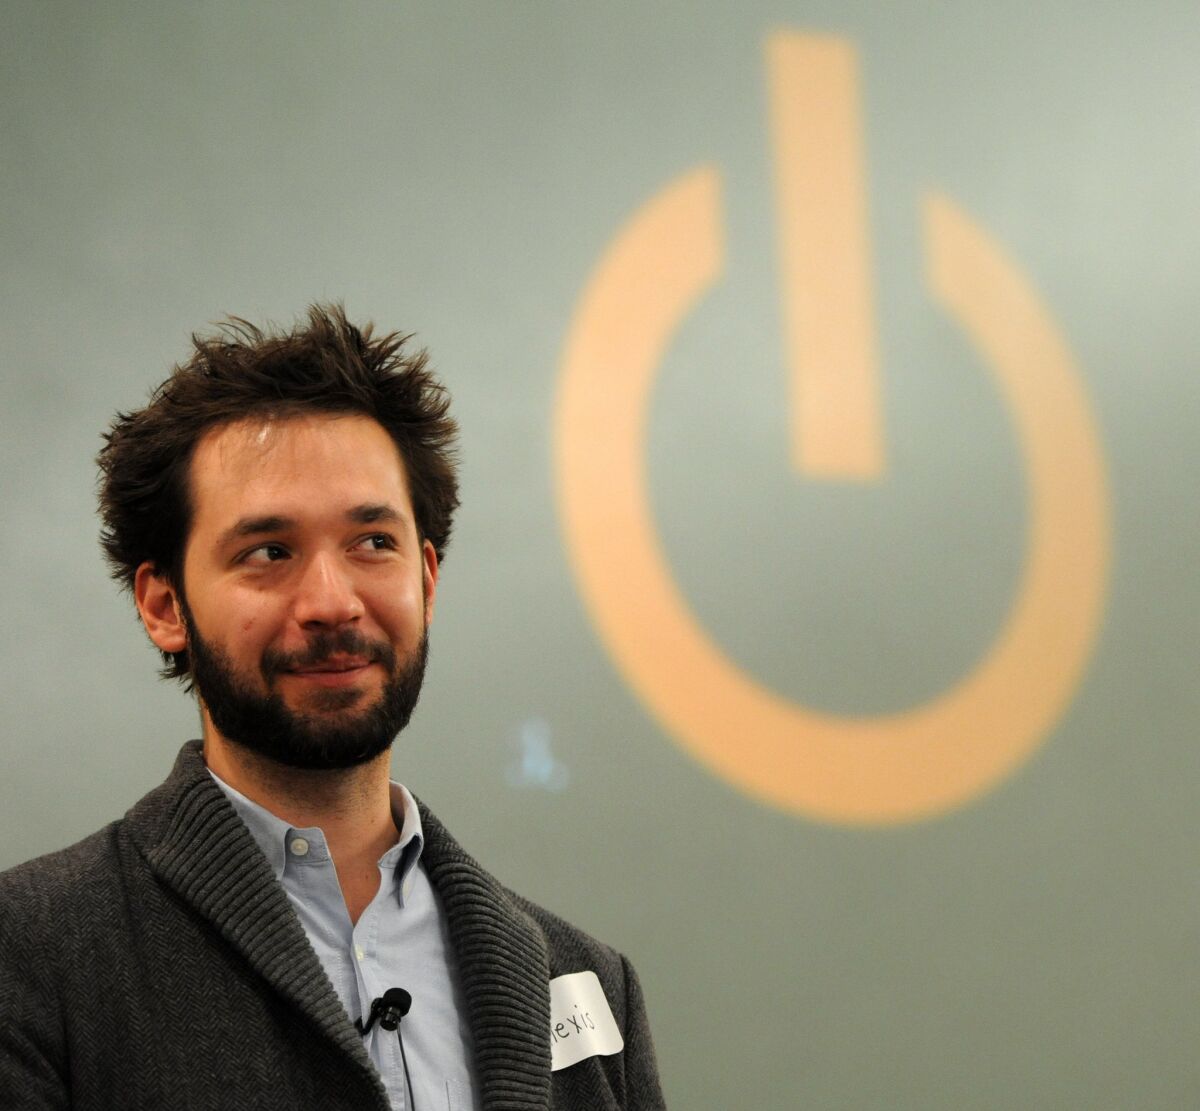 Reddit co-founder Alexis Ohanian has left the website's board of directors.